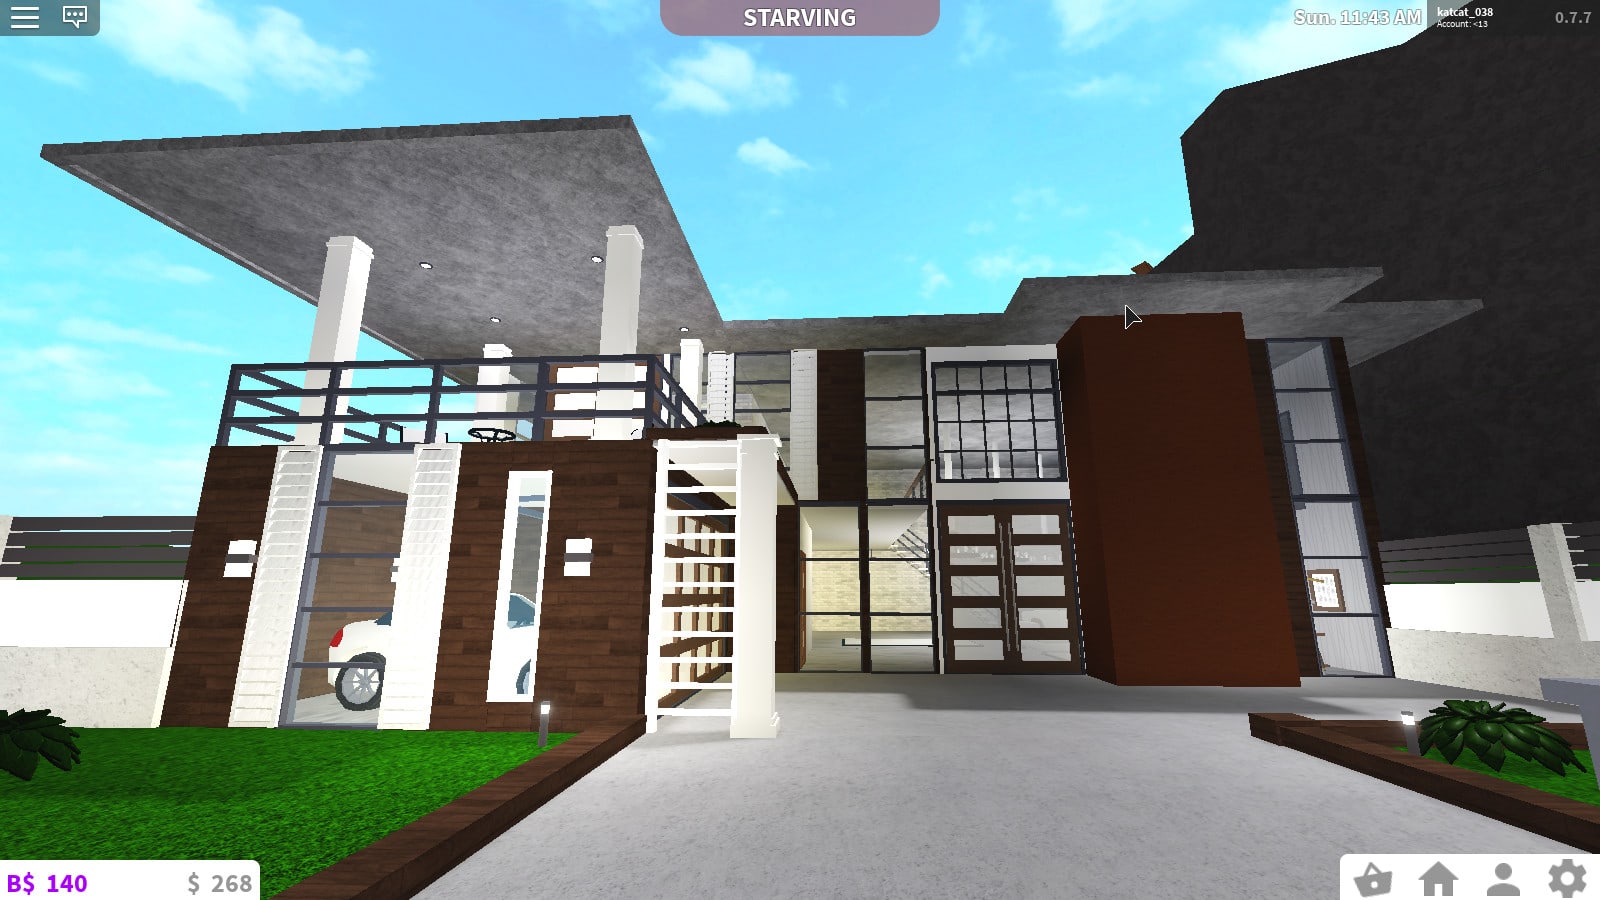 How To Build Houses In Roblox